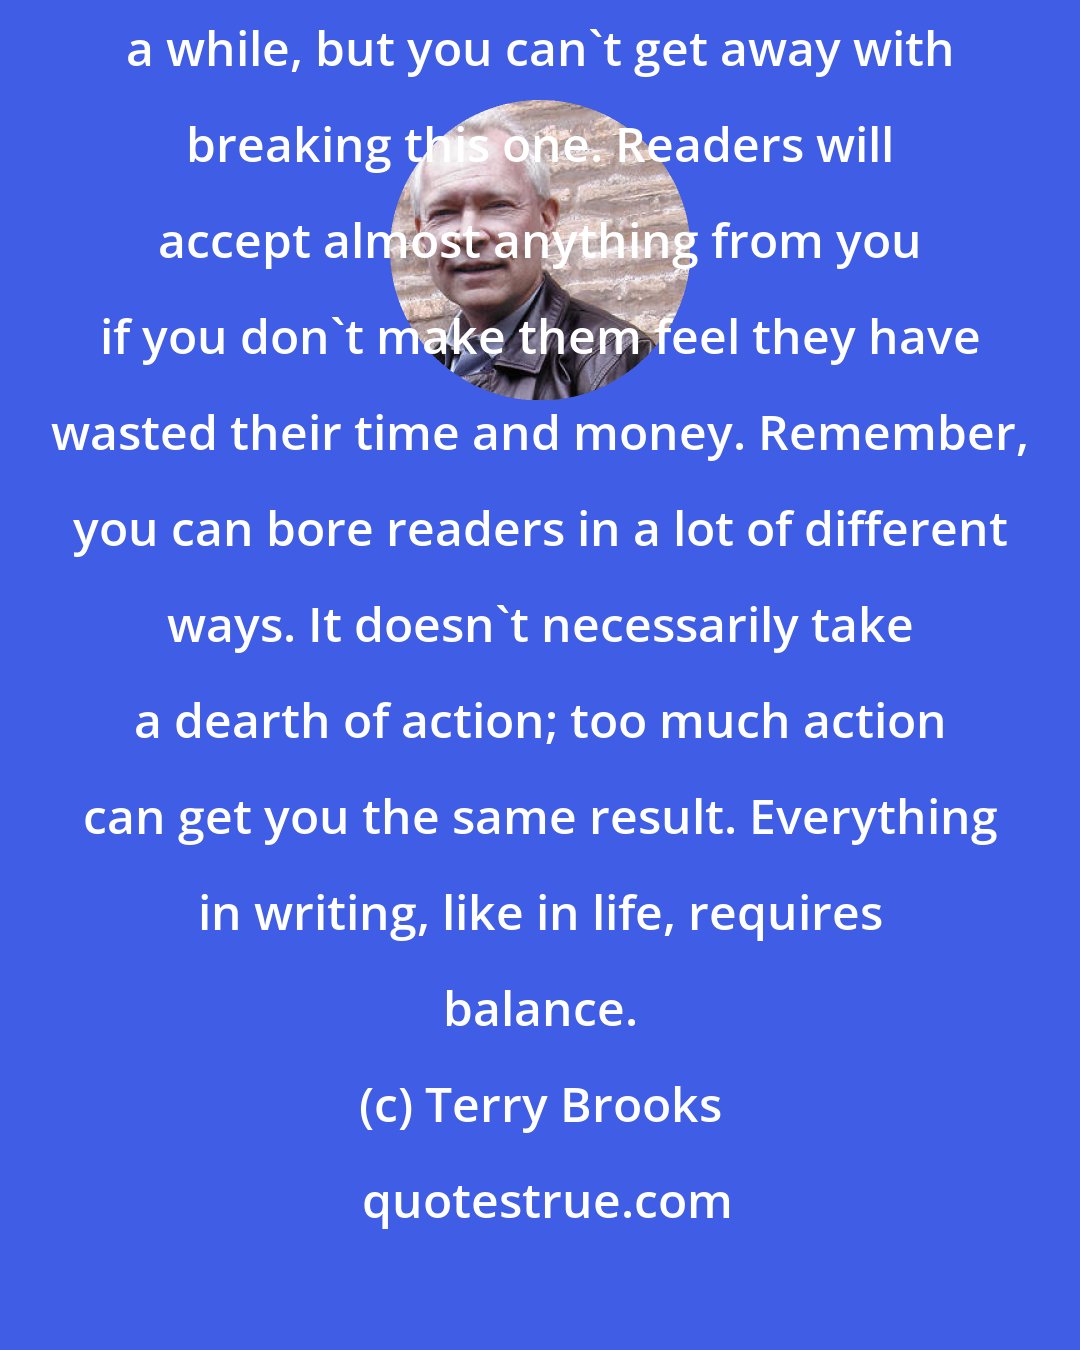 Terry Brooks: You can get away with breaking all of the other rules at least once in a while, but you can't get away with breaking this one. Readers will accept almost anything from you if you don't make them feel they have wasted their time and money. Remember, you can bore readers in a lot of different ways. It doesn't necessarily take a dearth of action; too much action can get you the same result. Everything in writing, like in life, requires balance.